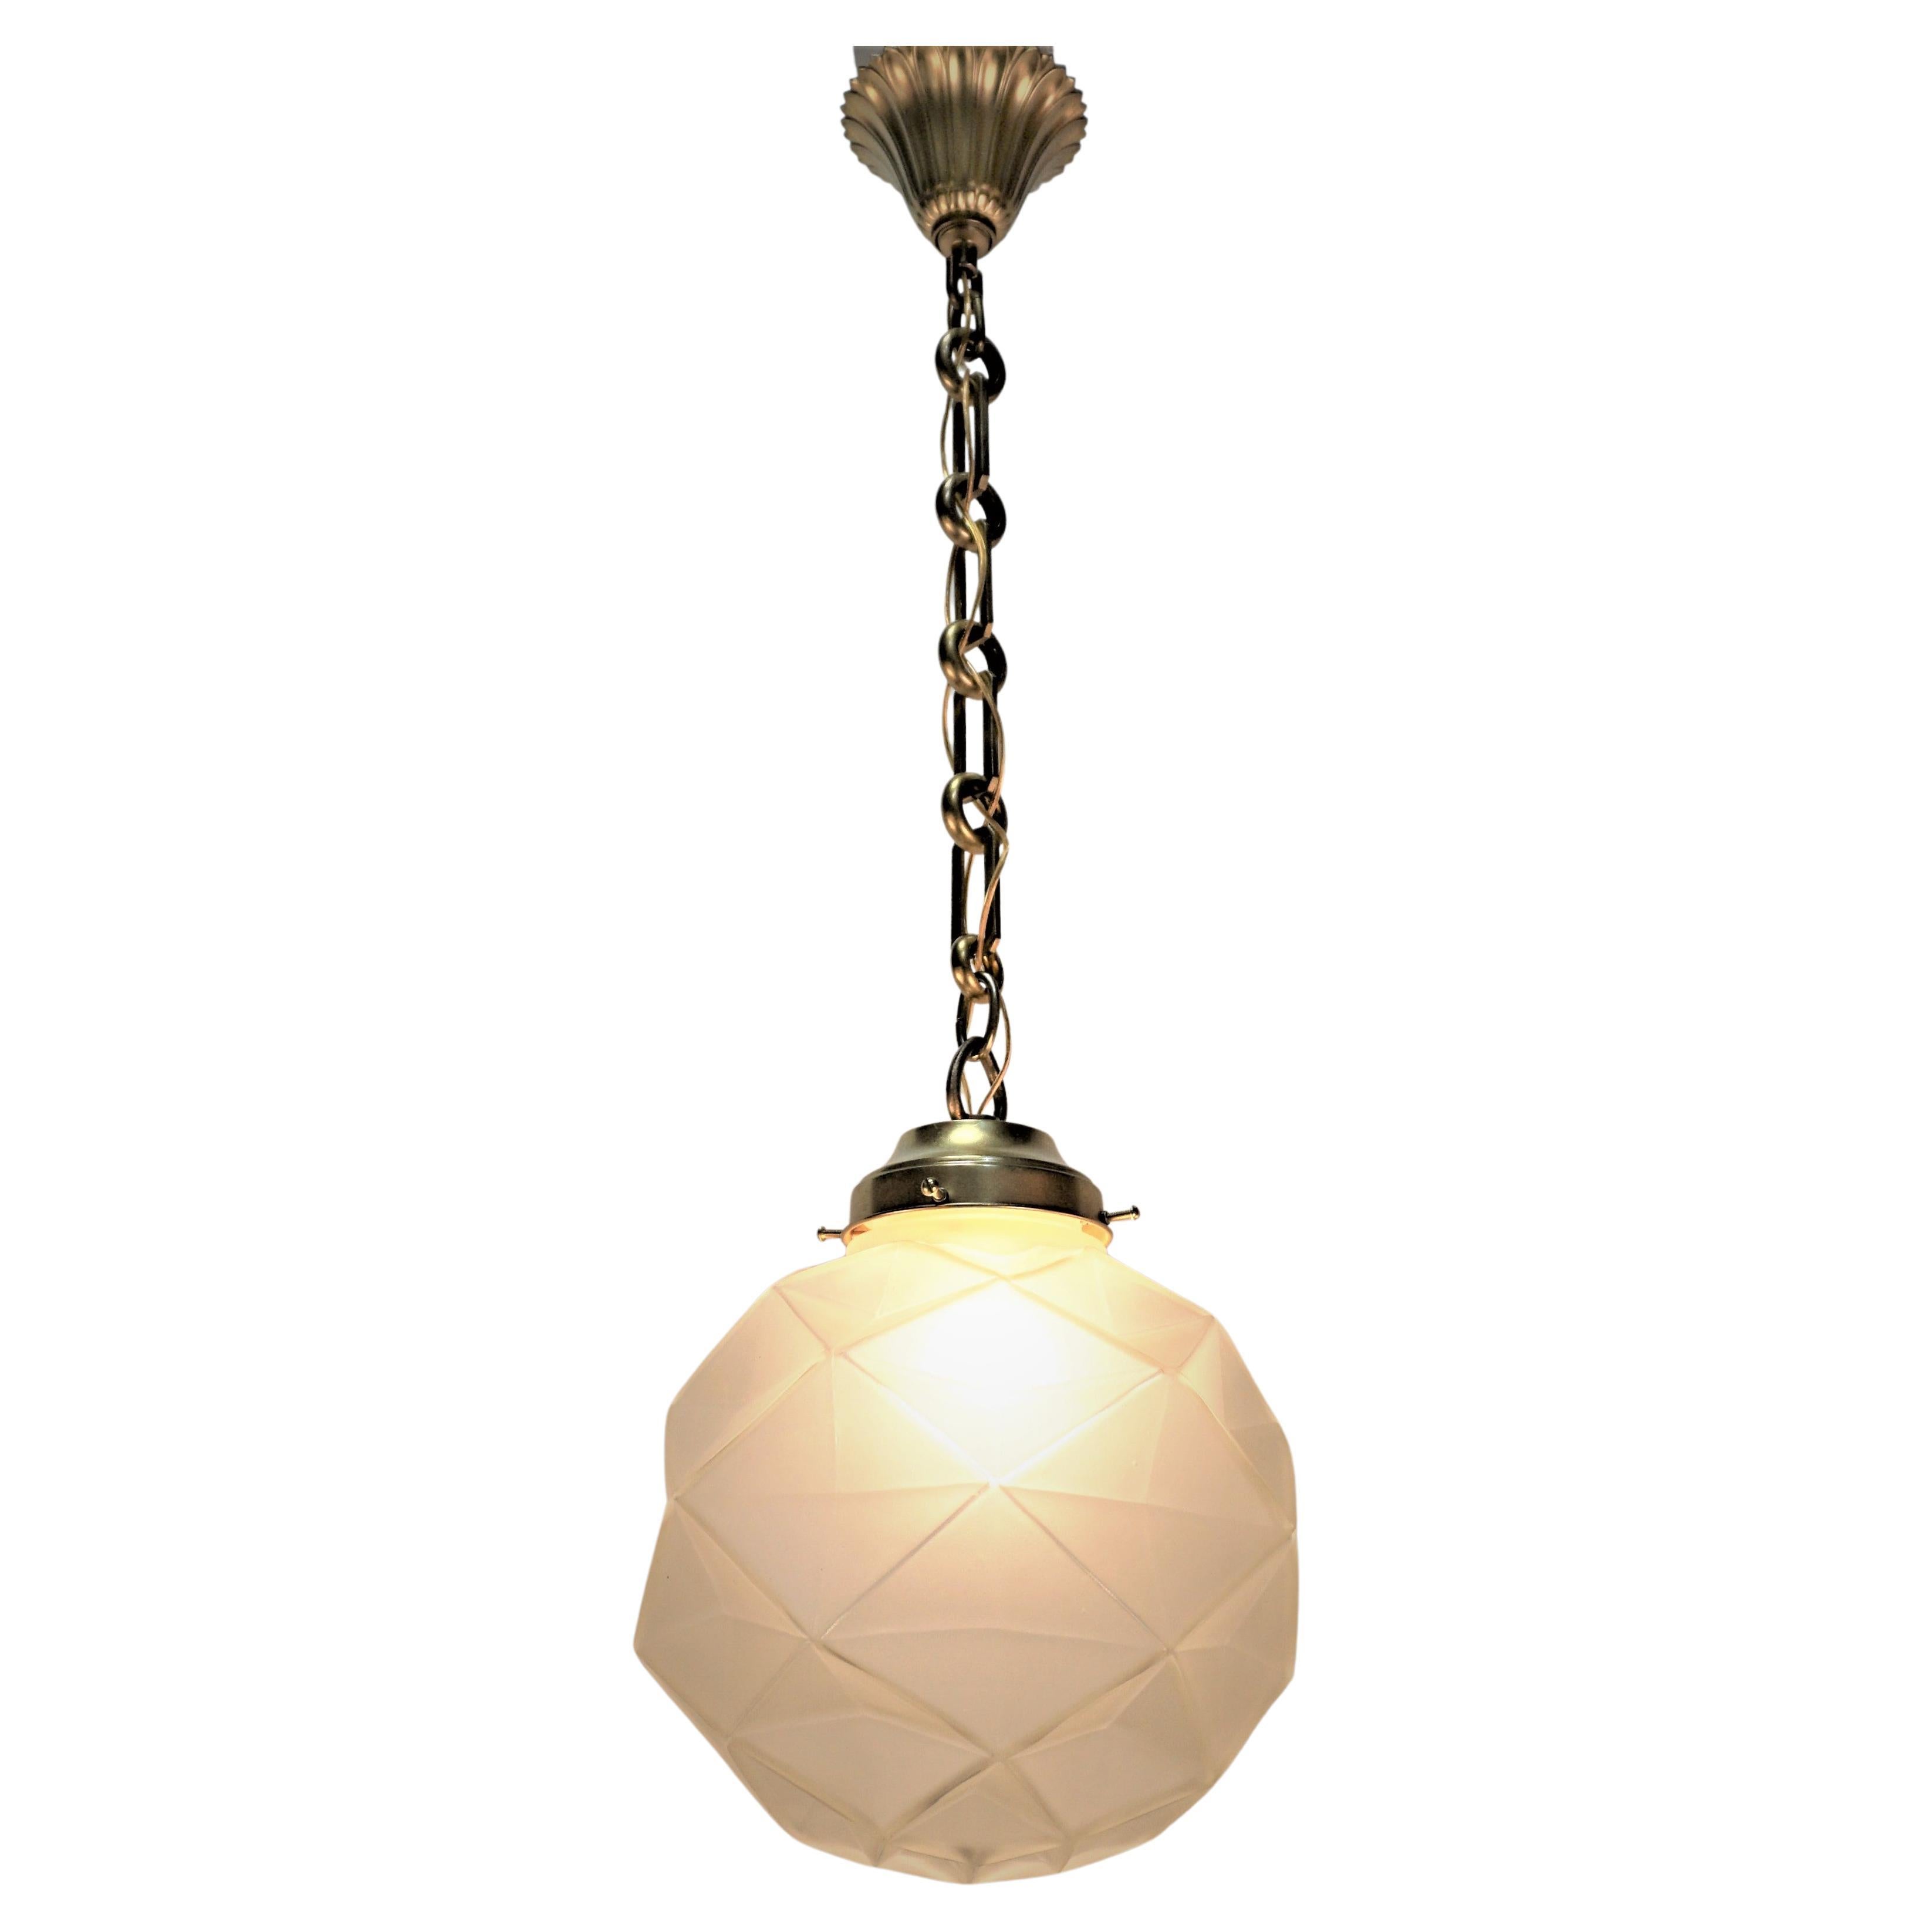 French Art Deco Golbe Pendent/Chandelier